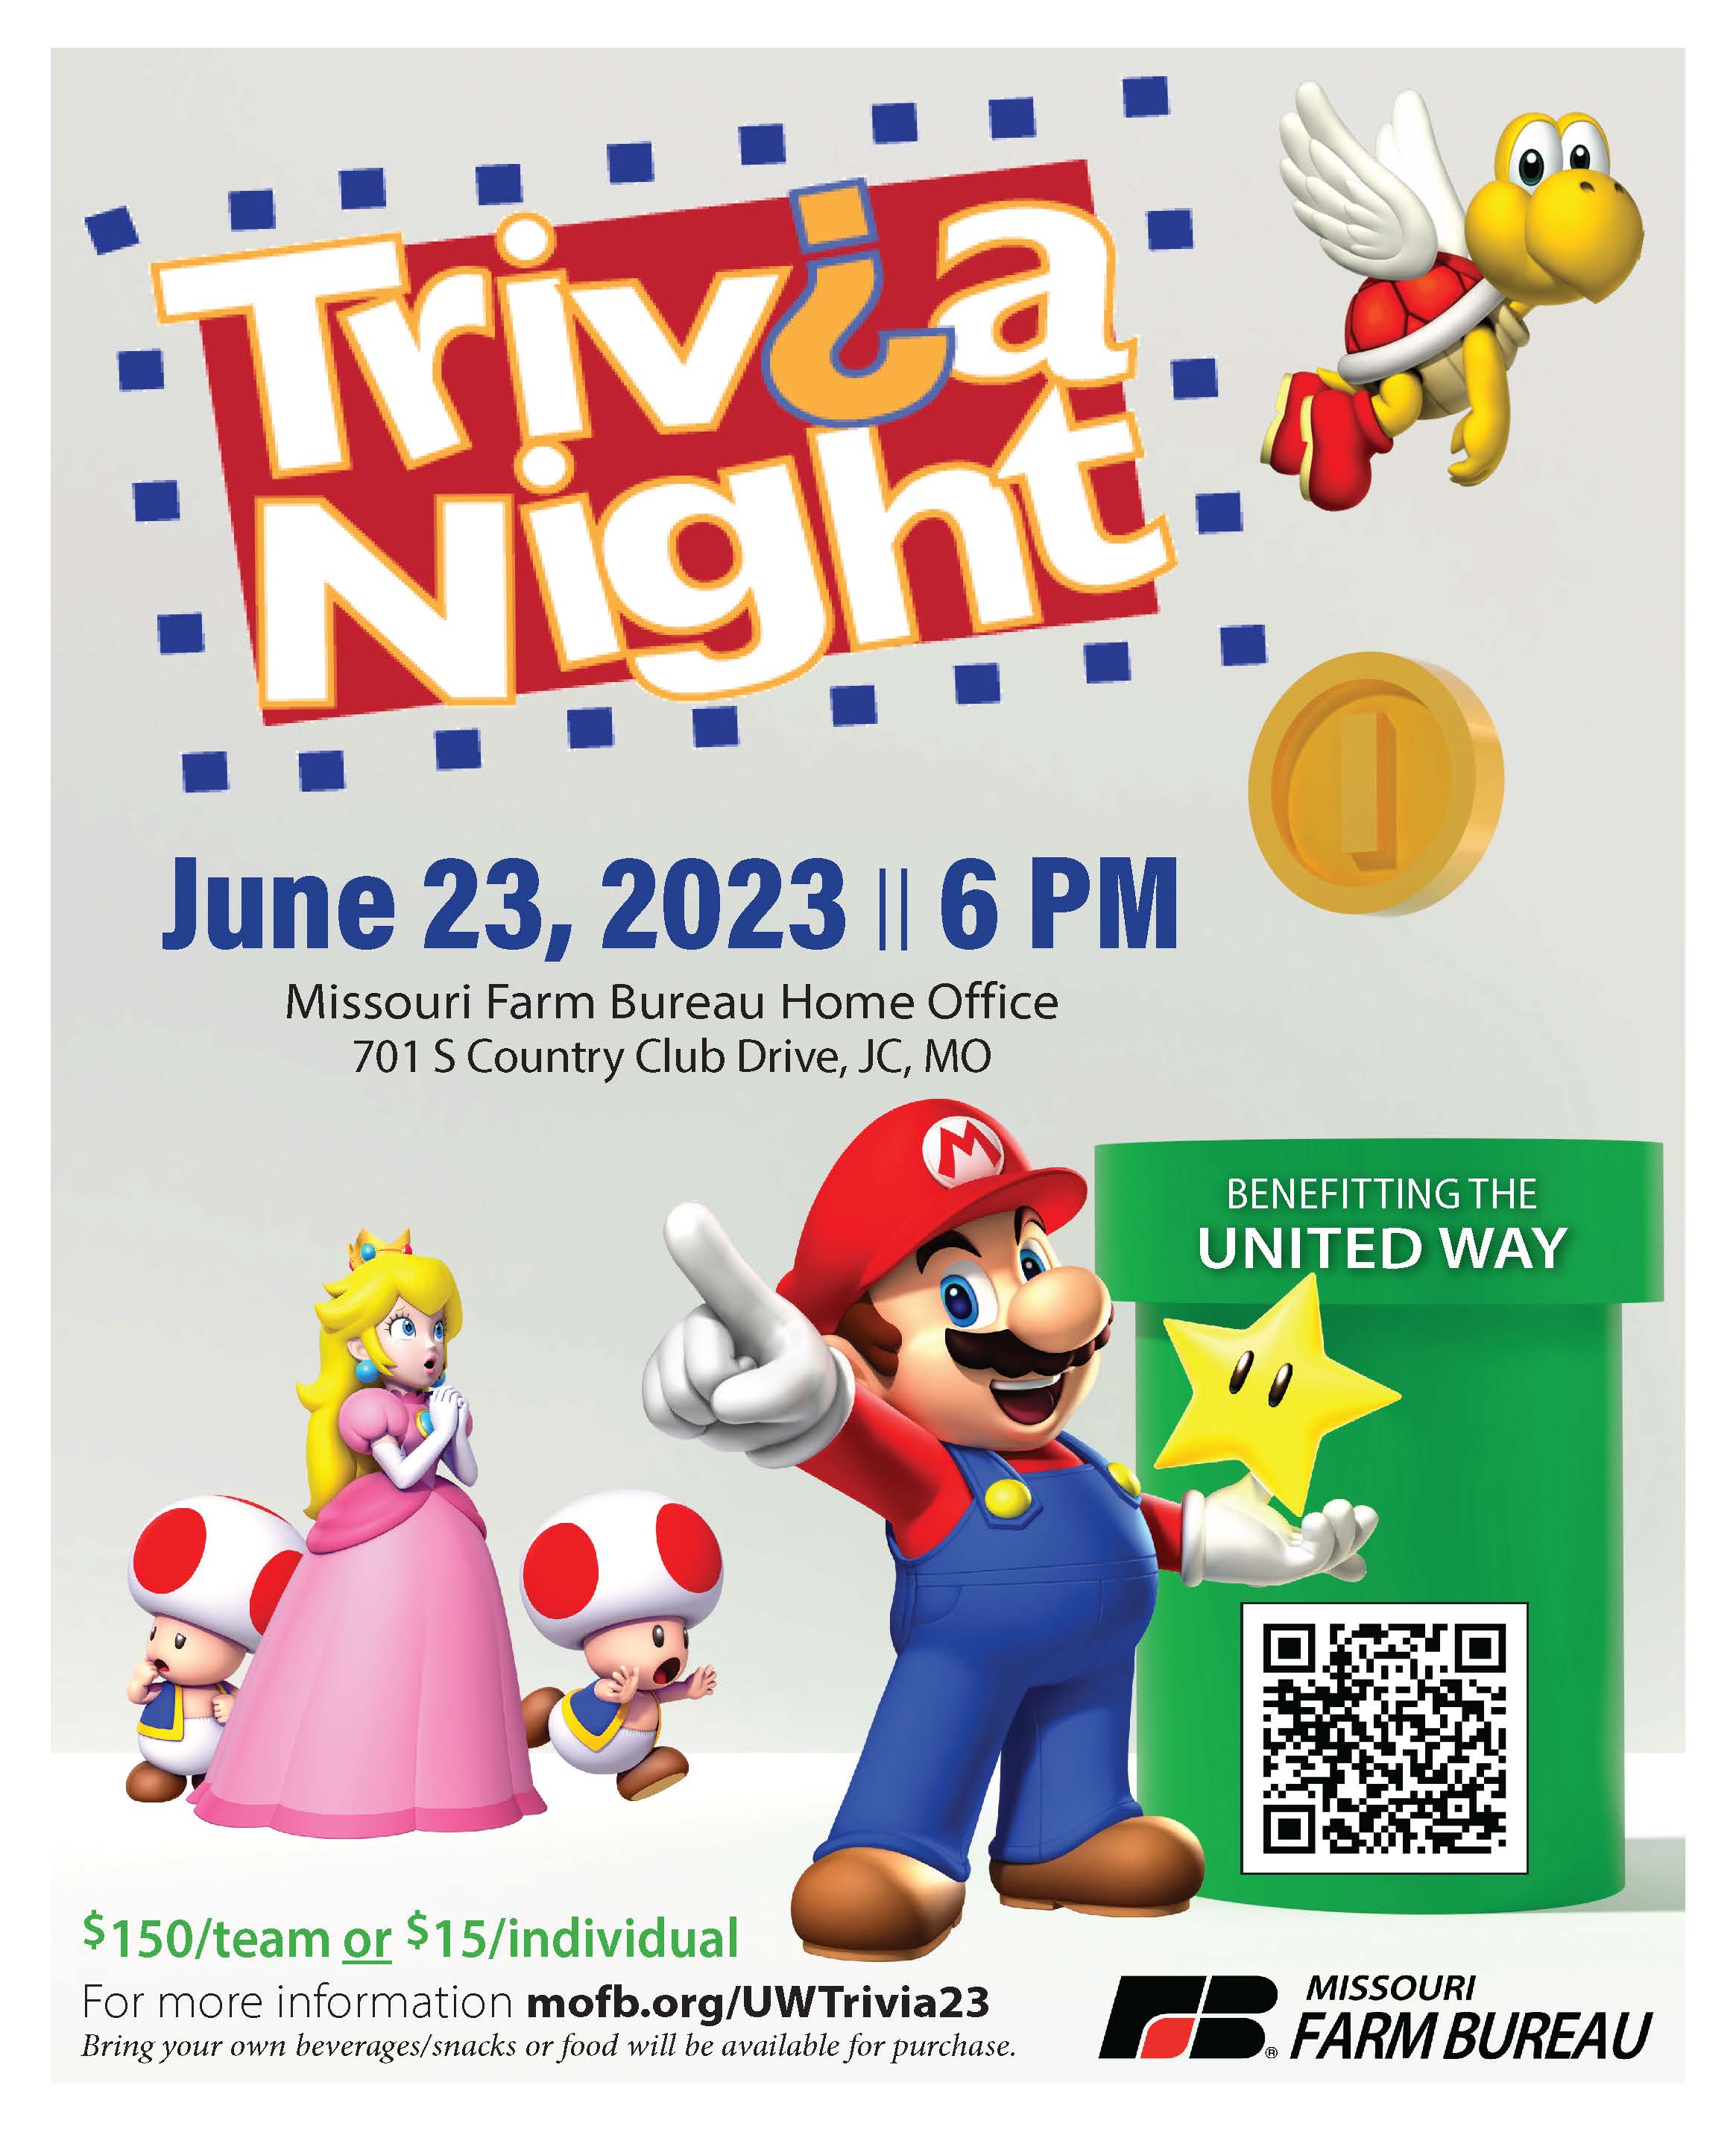 June 23 at 6 pm Trivia Night at Missouri Farm Bureau benefiting United Way $150 for a team or $15 for an individual